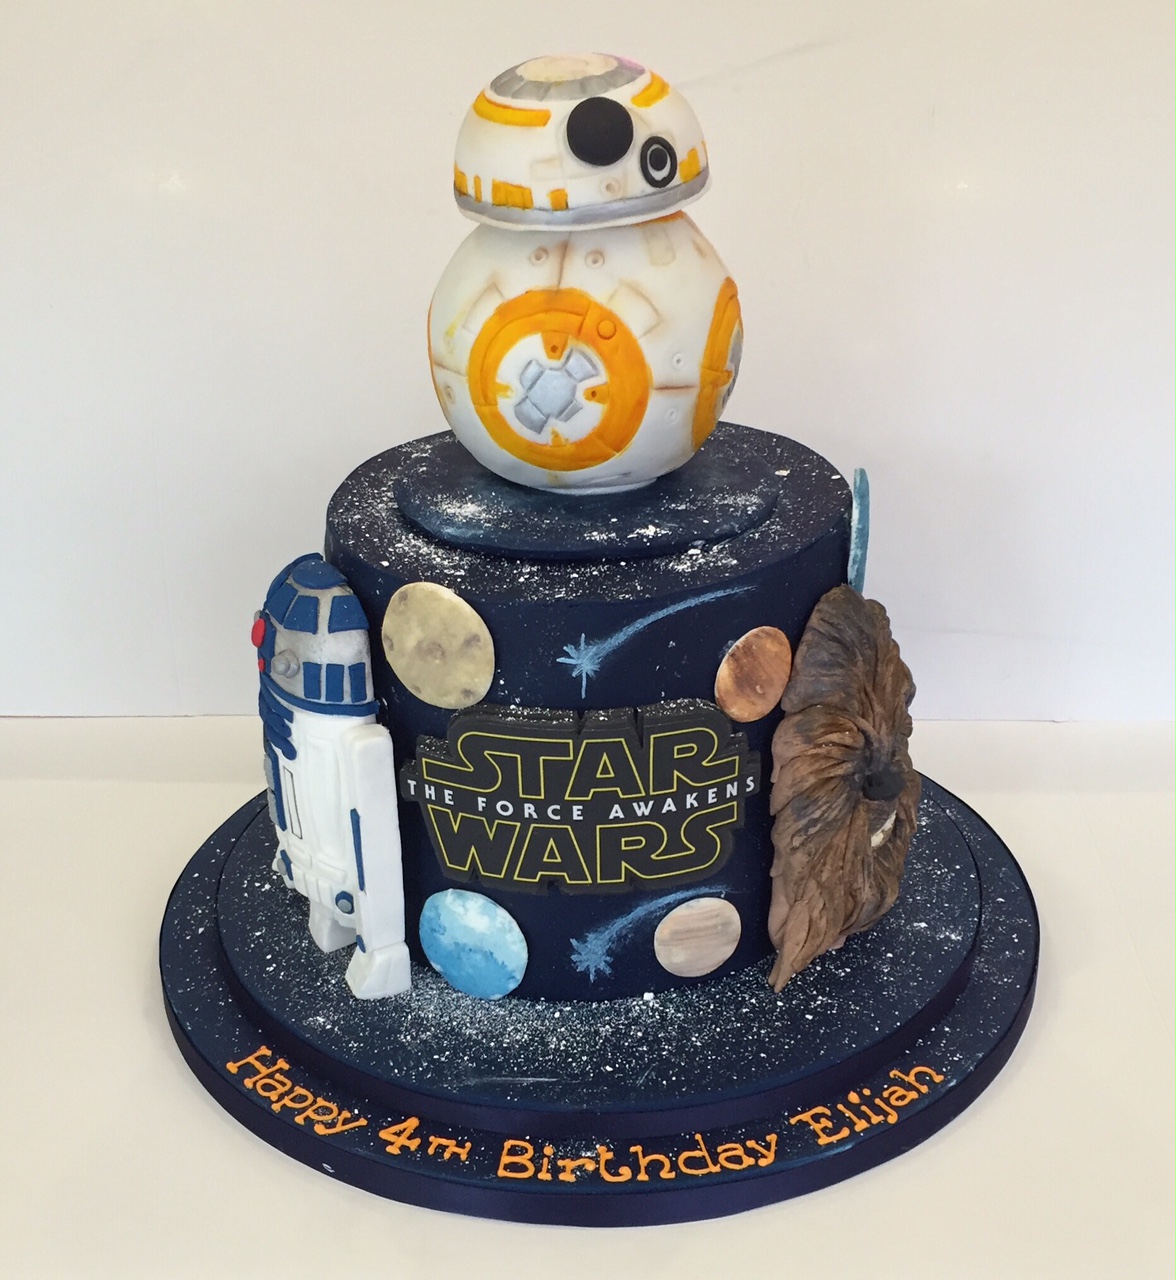 1900) 3 Tier Star Wars Cake featuring R2D2 & the Deathstar - ABC Cake Shop  & Bakery